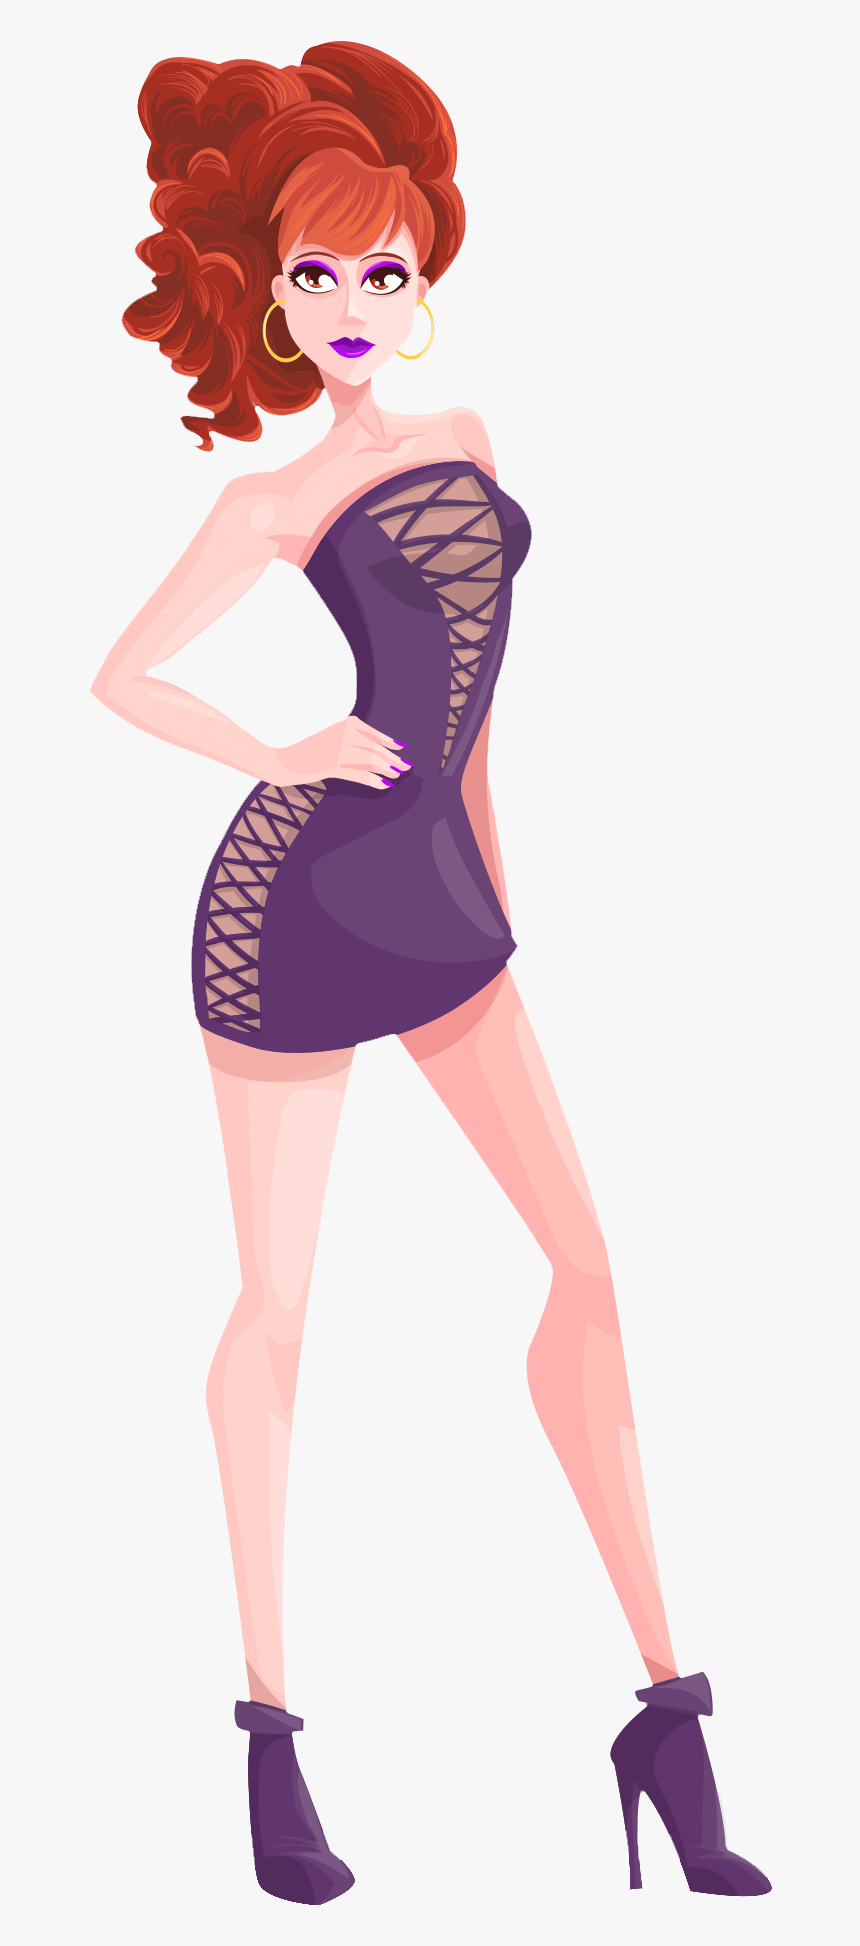 Sexy Girl Vector Png Transparent Image, Png Download, Free Download